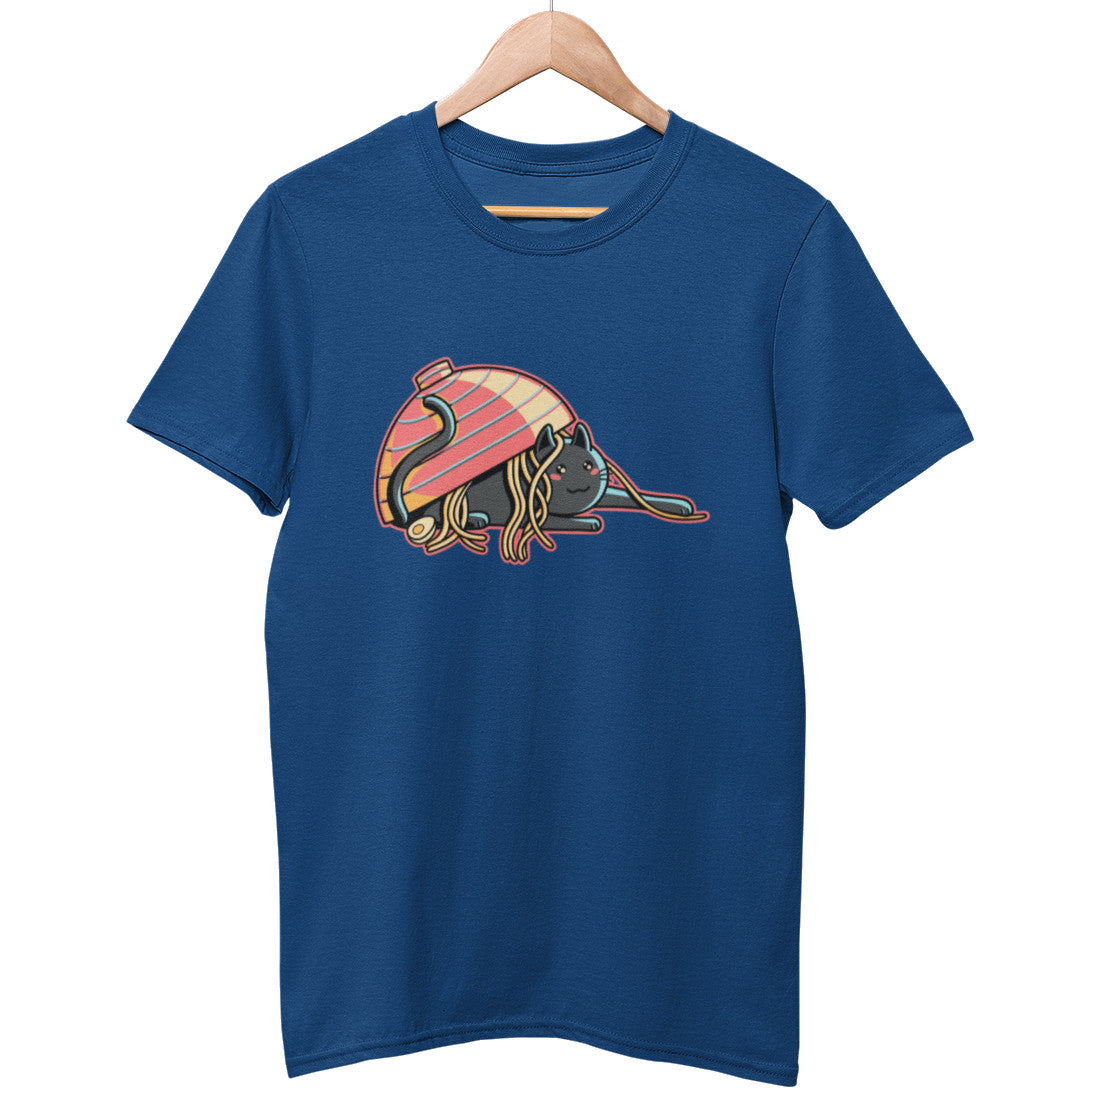 A deep marjorelle blue colour unisex crewneck t-shirt on a hanger with a design on its chest of a cute black cat emerging from beneath an overturned striped bowl of ramen noodles